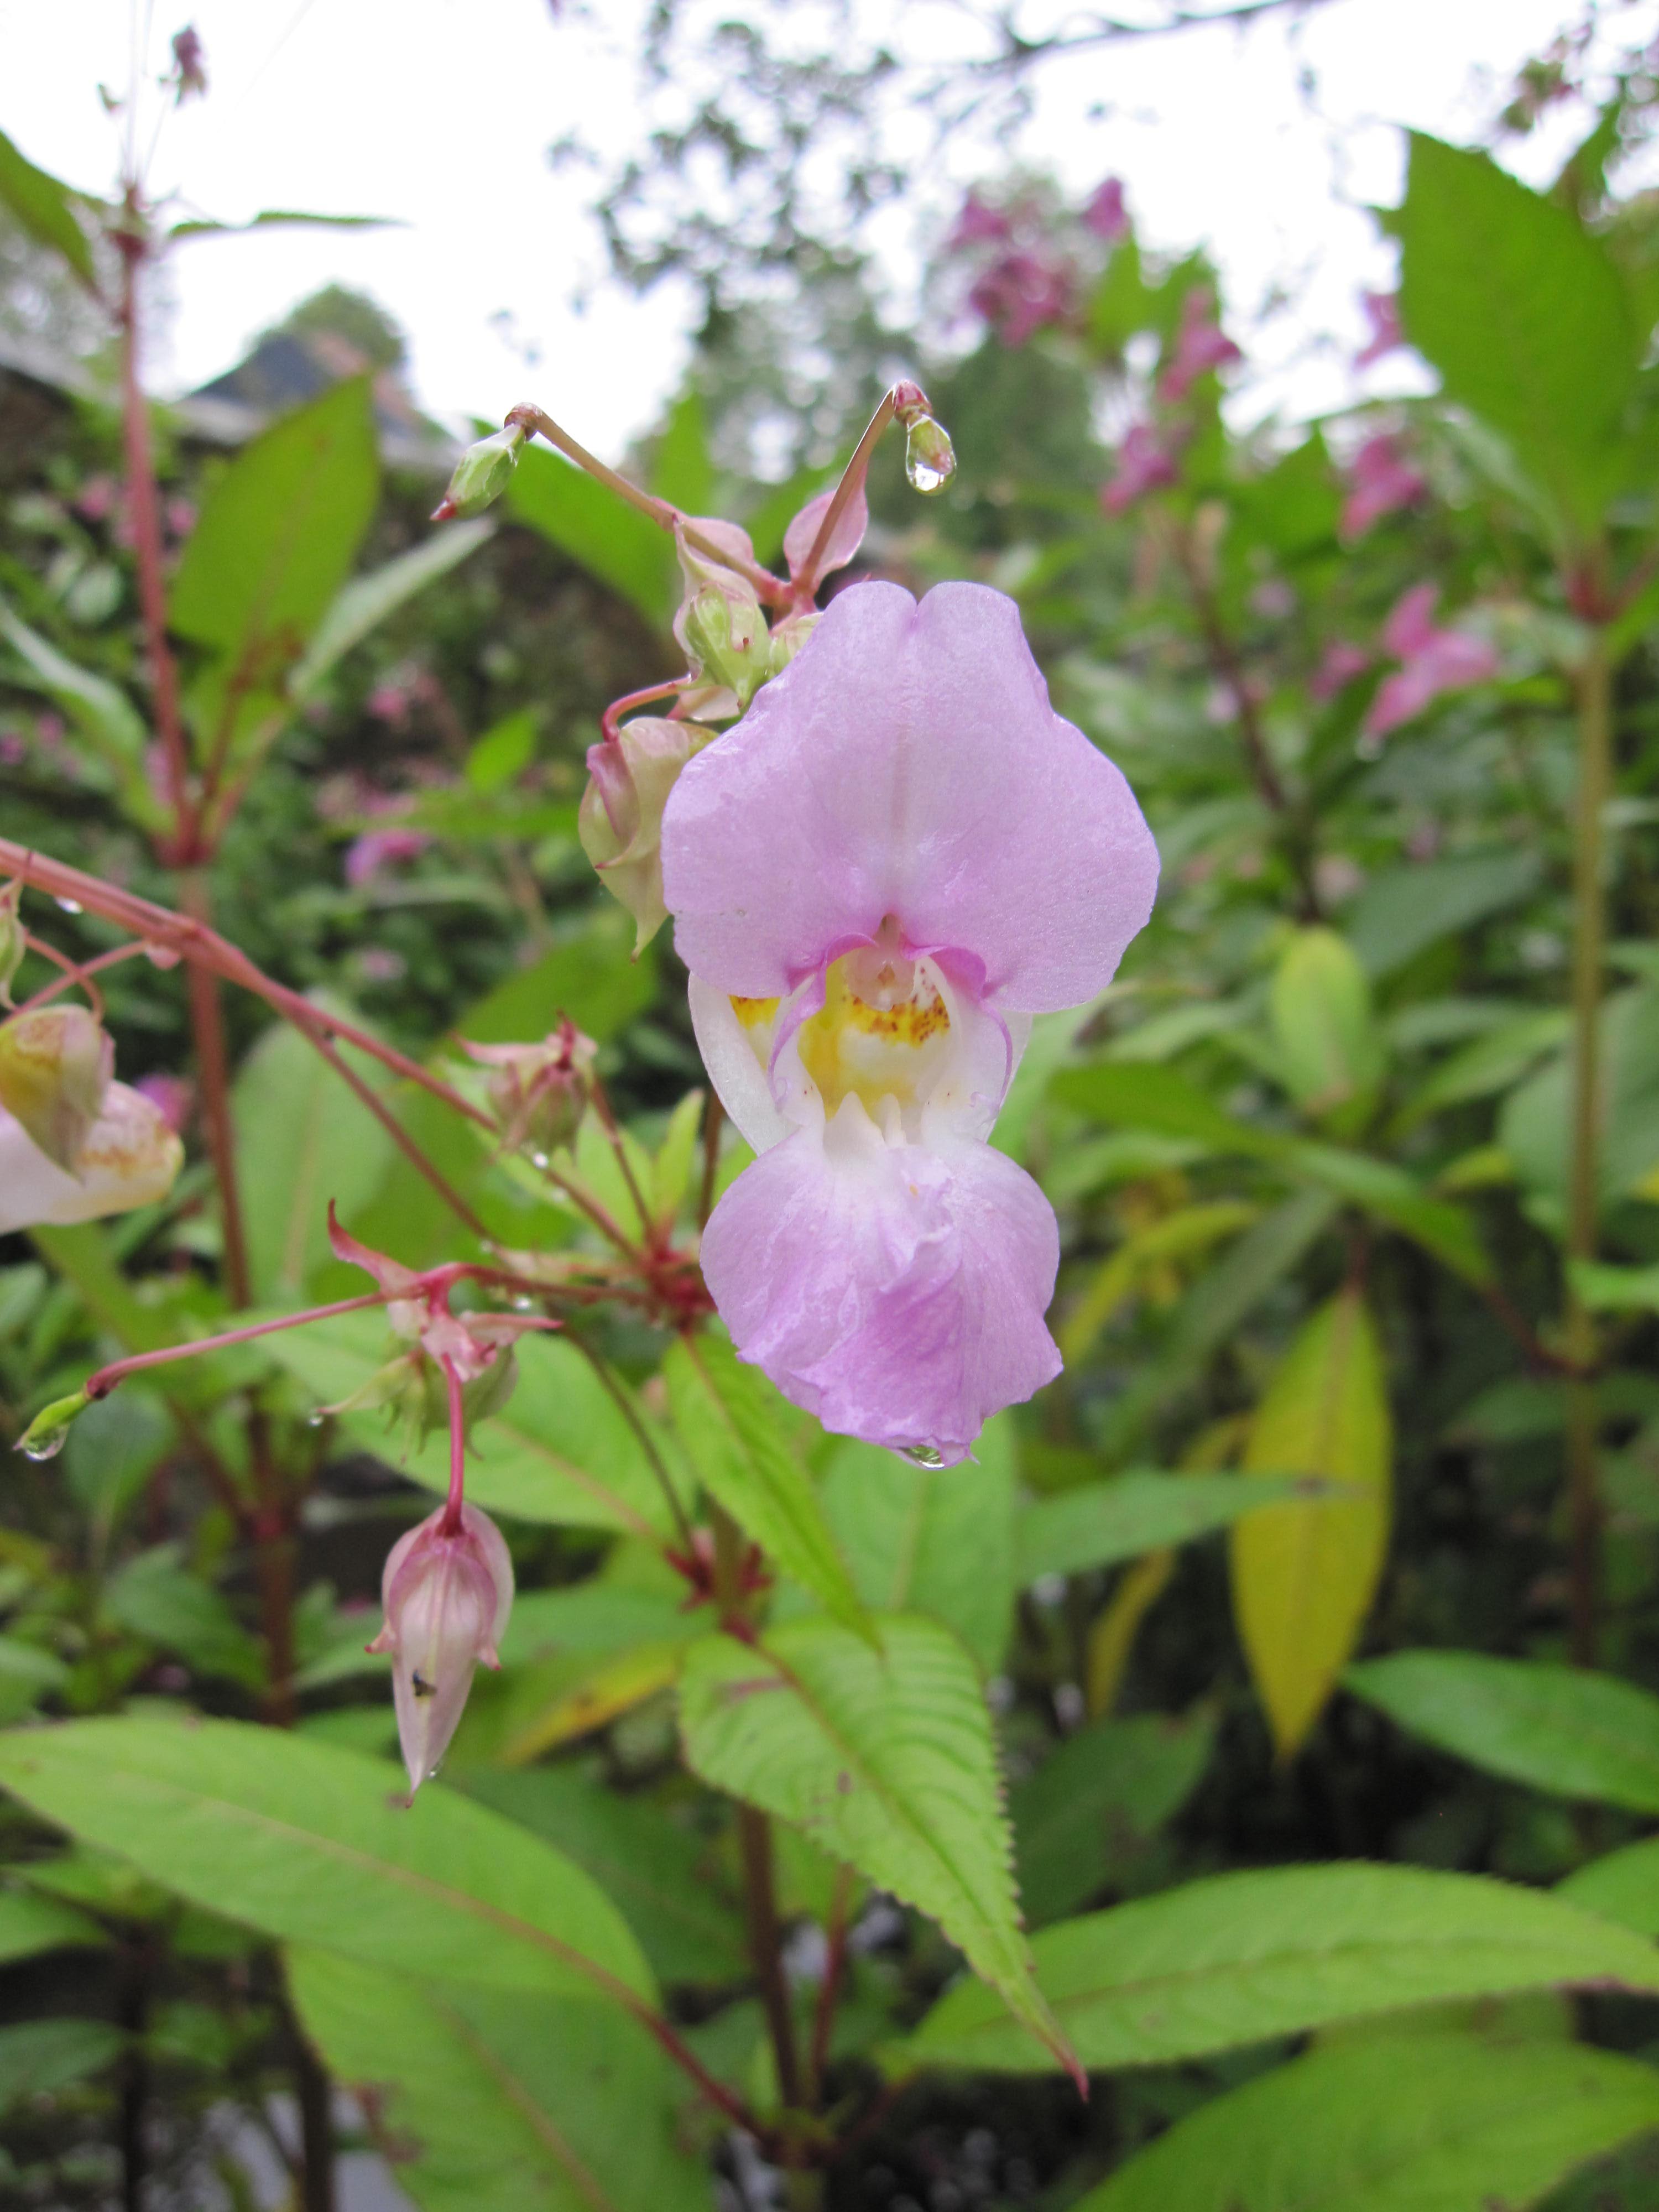 Himalayan balsam may look pretty but it can cause havoc on river banks, out-competing native vegetation and dying back over winter leaving banks open to erosion